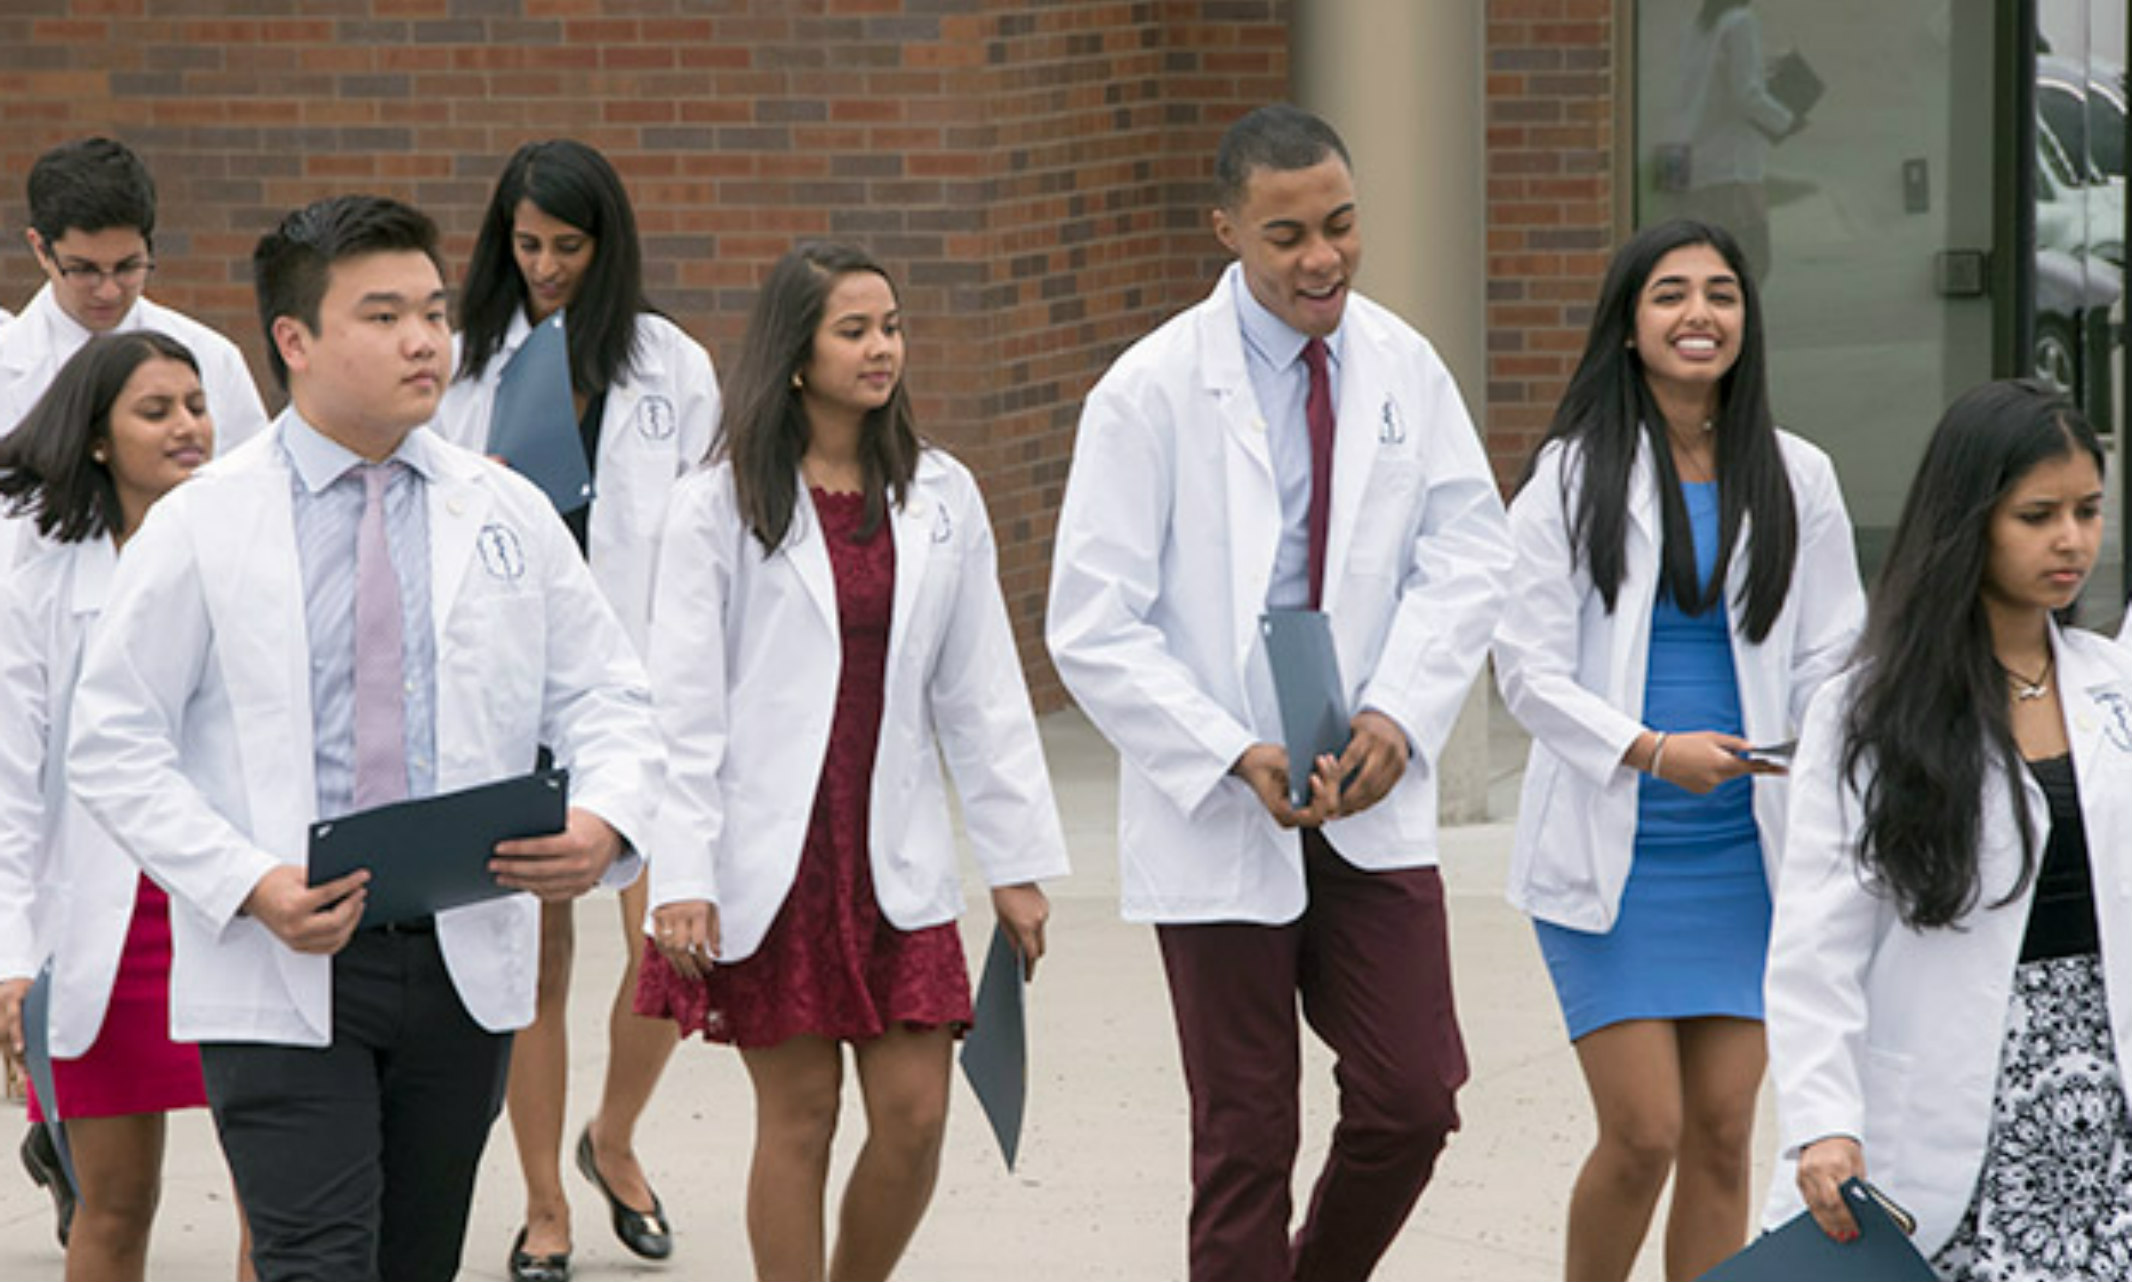 UMKC School of Medicine students presenting in diverse ethnicities walk in their white coats